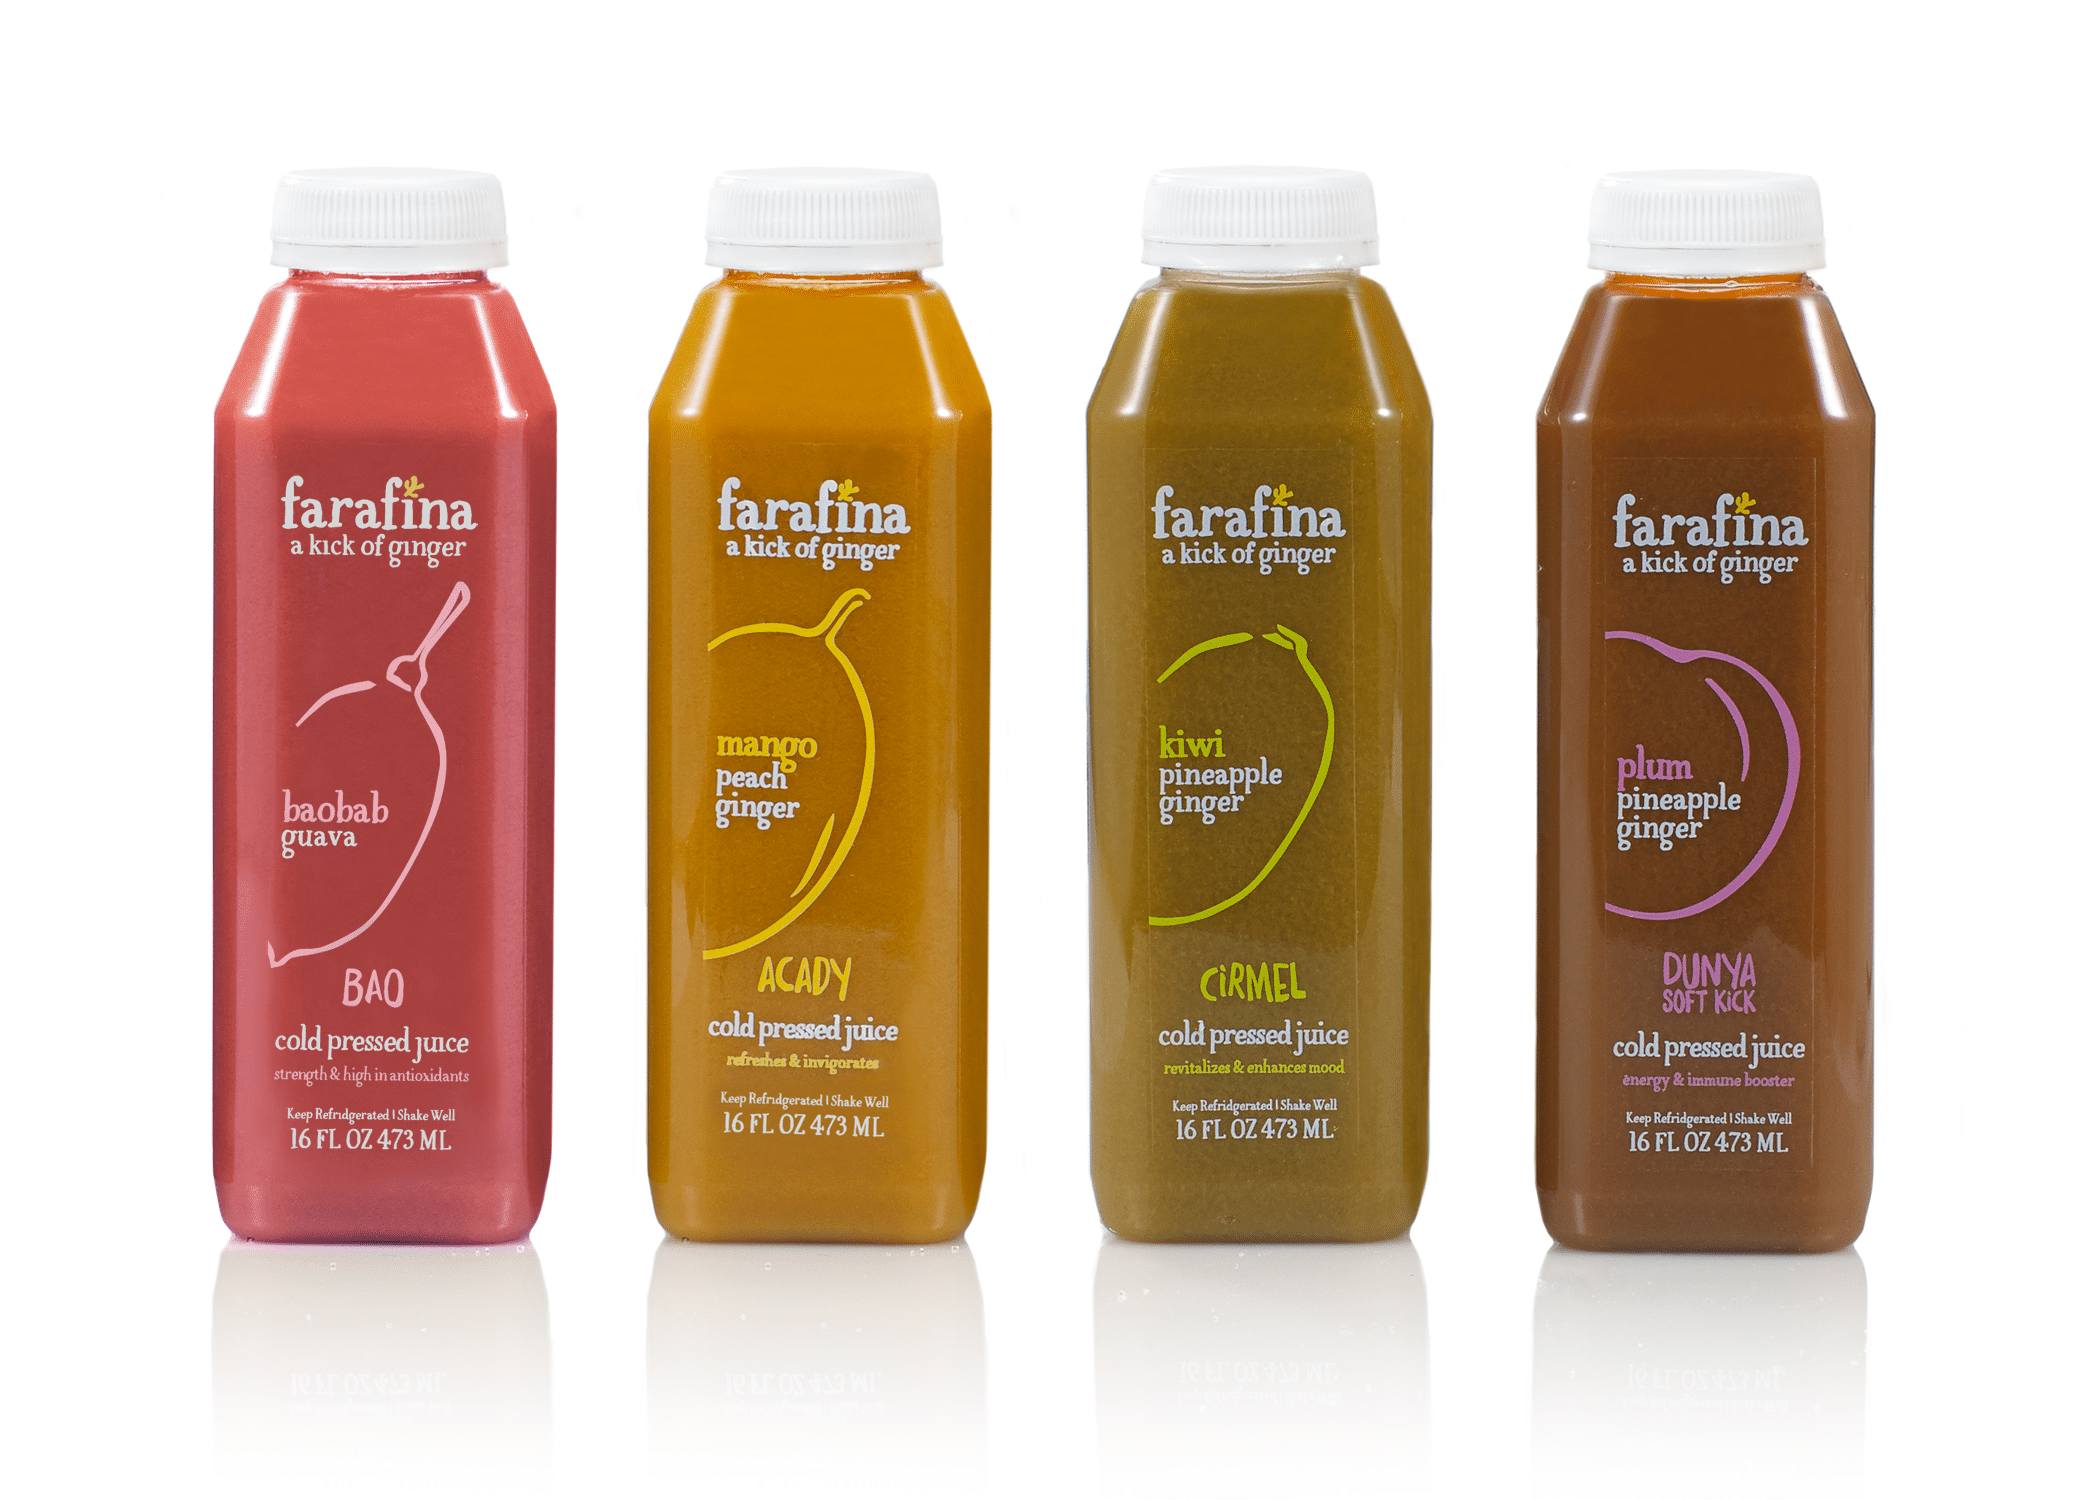 Farafina Juice packaging bottle designs with vibrant, hand drawn, rustic illustrations of the main fruit in 4 juices.